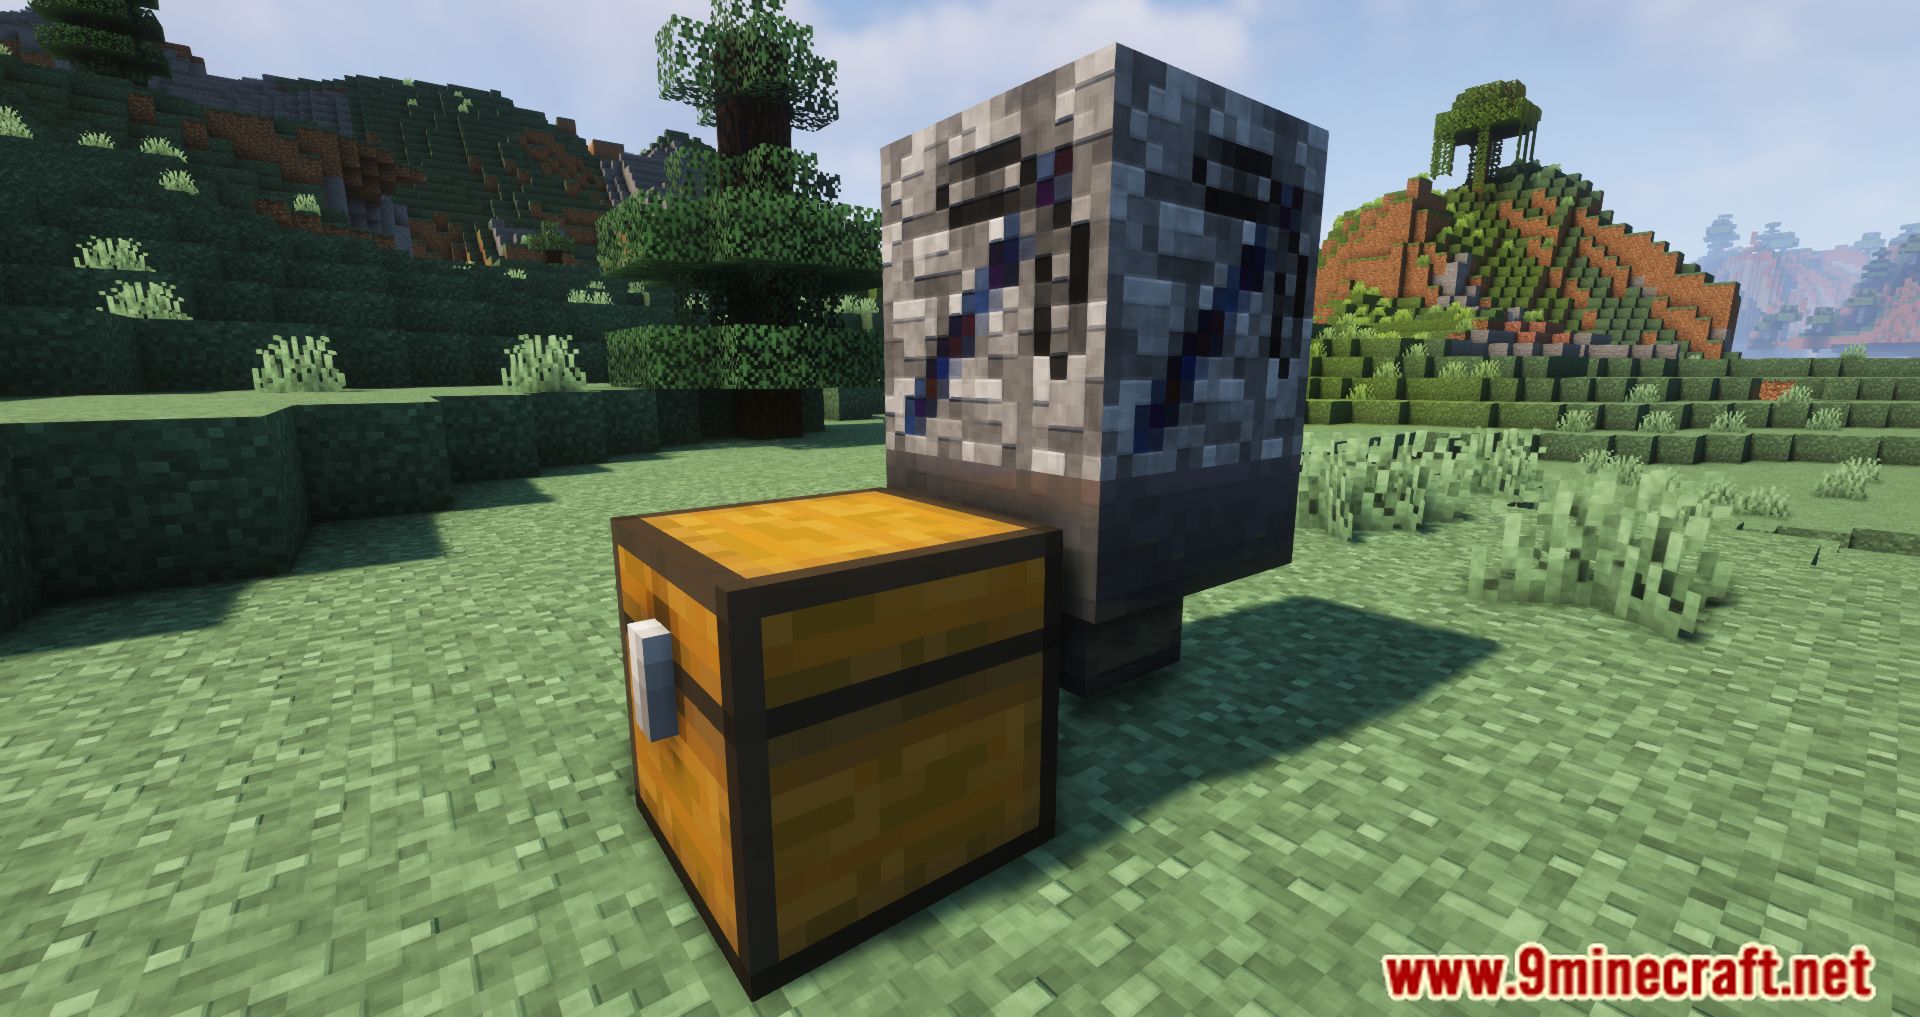 Simple Cobblestone Generator Mod (1.20.4, 1.19.4) - A New Feature Added To The Game 3